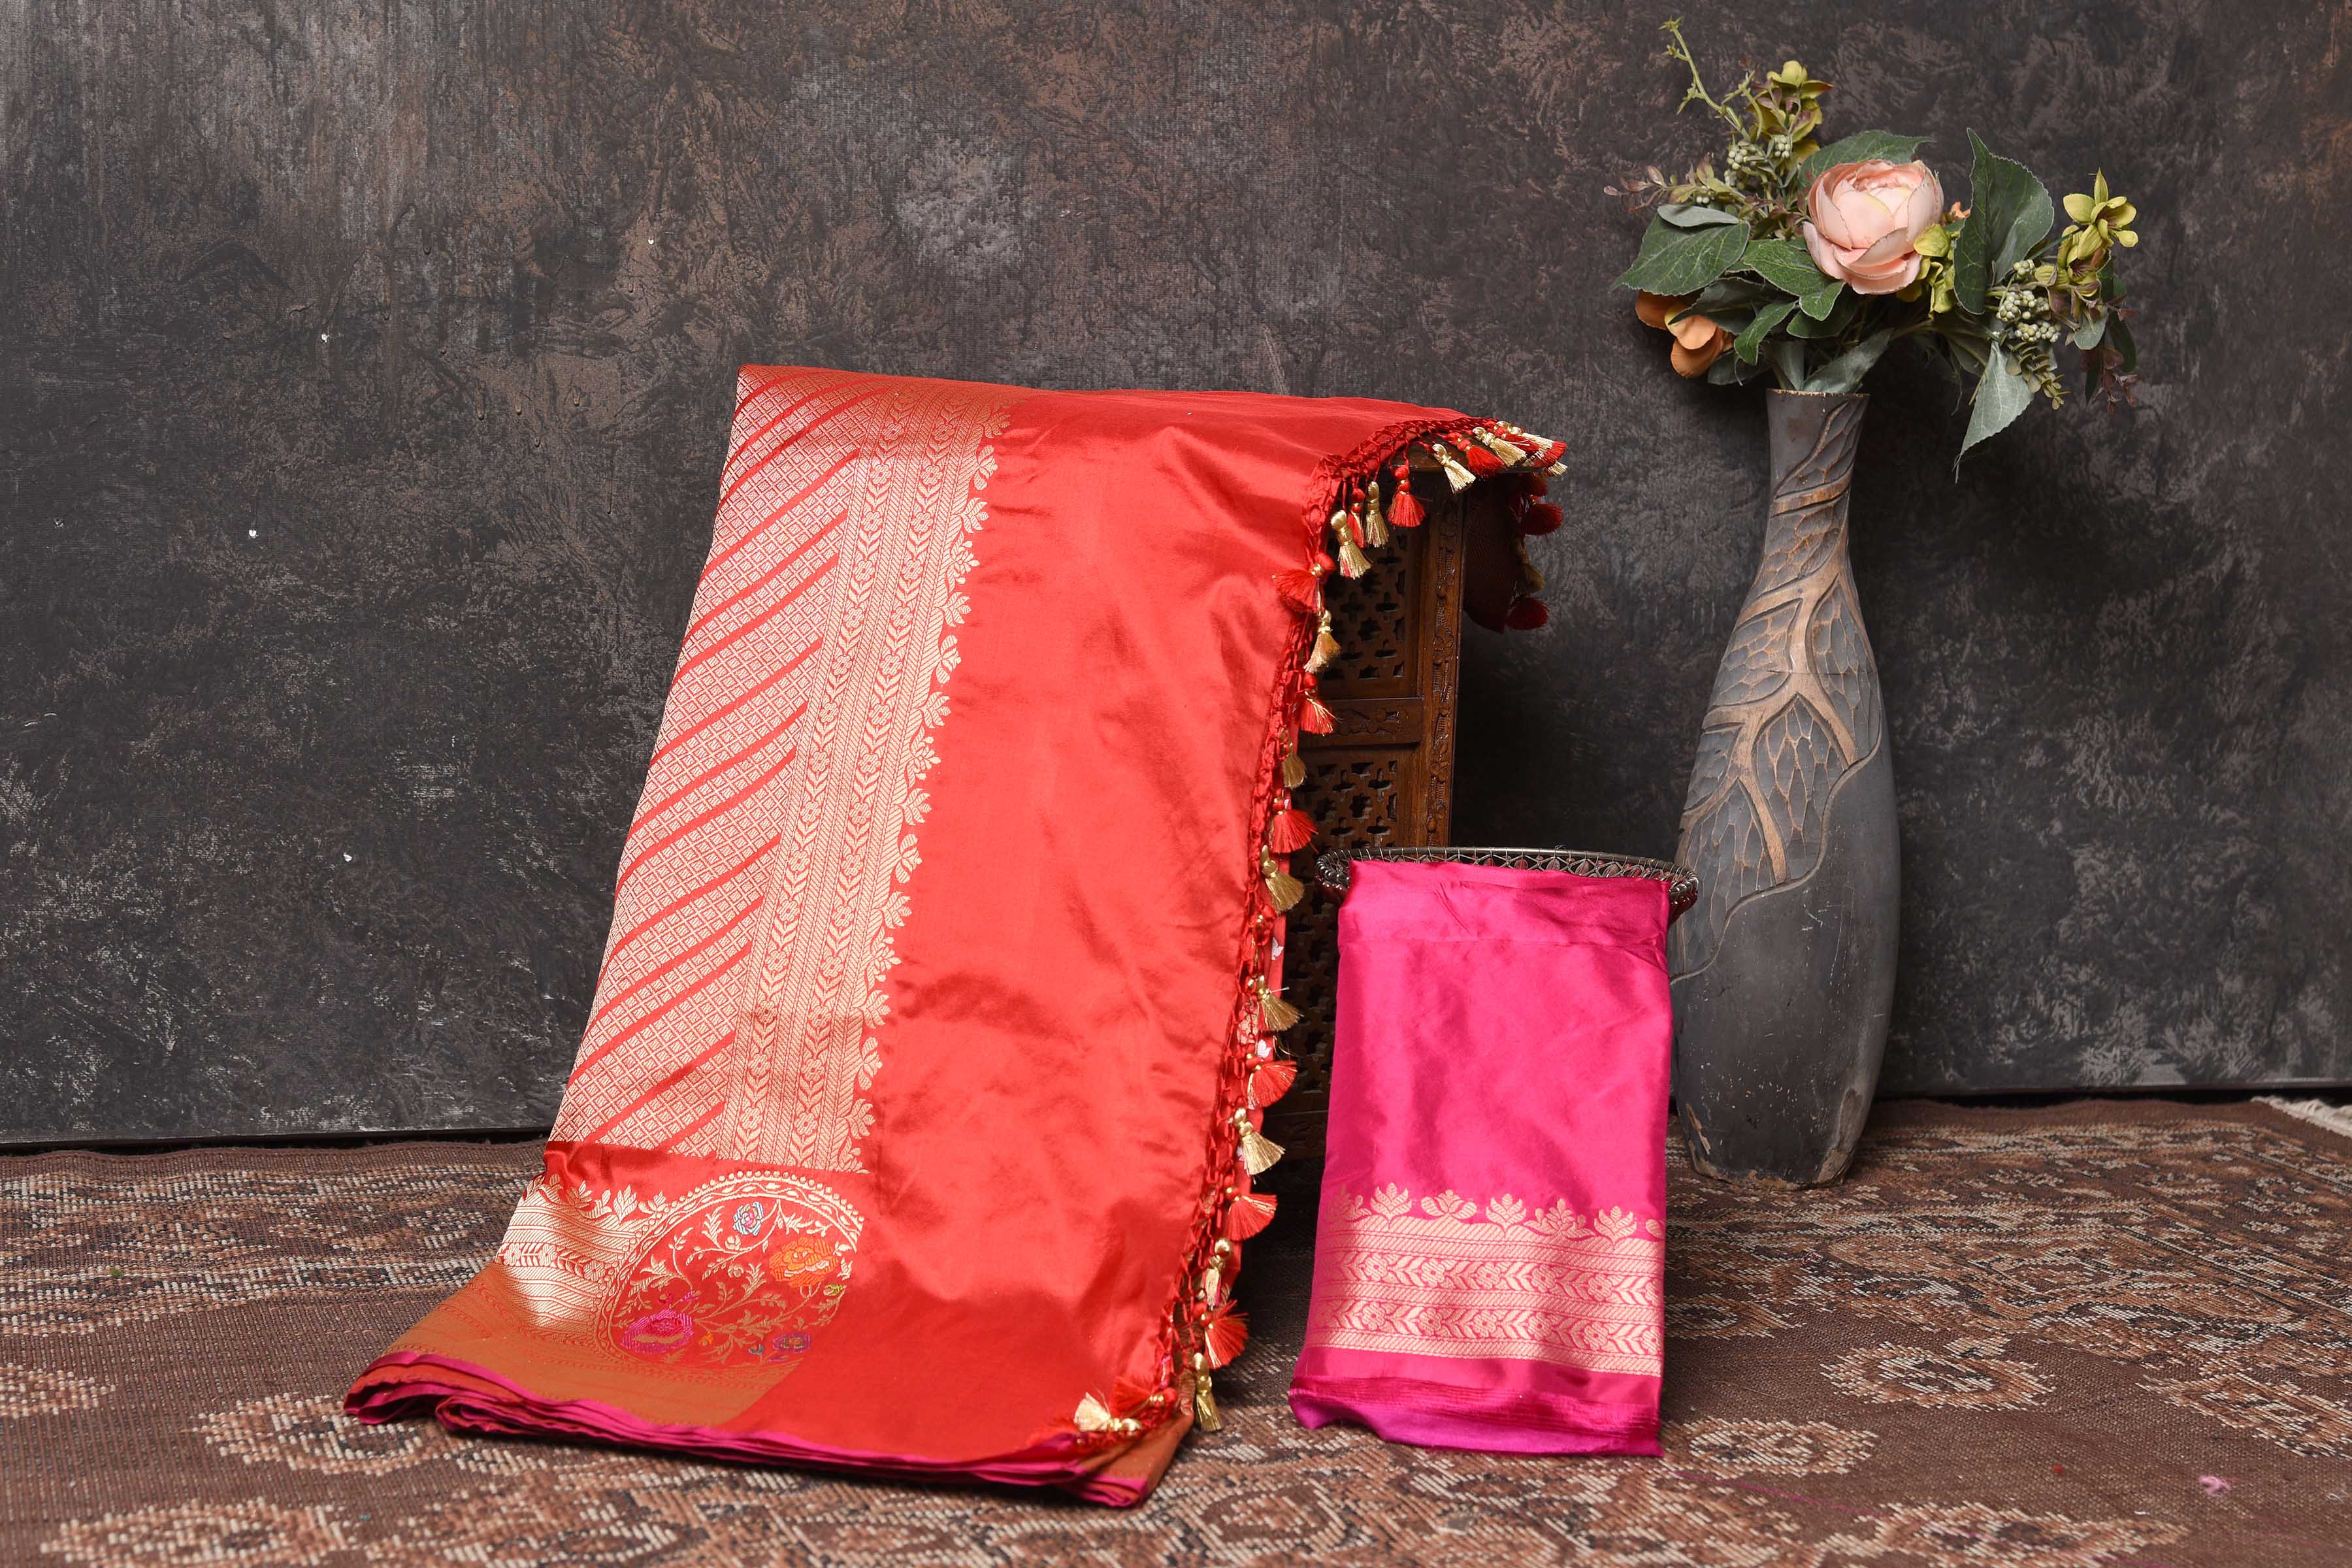 Buy red fancy Katan silk saree online in USA with overall zari buta and border. Be the center of attraction on special occasions in ethnic sarees, designer sarees, embroidered sarees, handwoven sarees, pure silk sarees from Pure Elegance Indian saree store in USA.-blouse